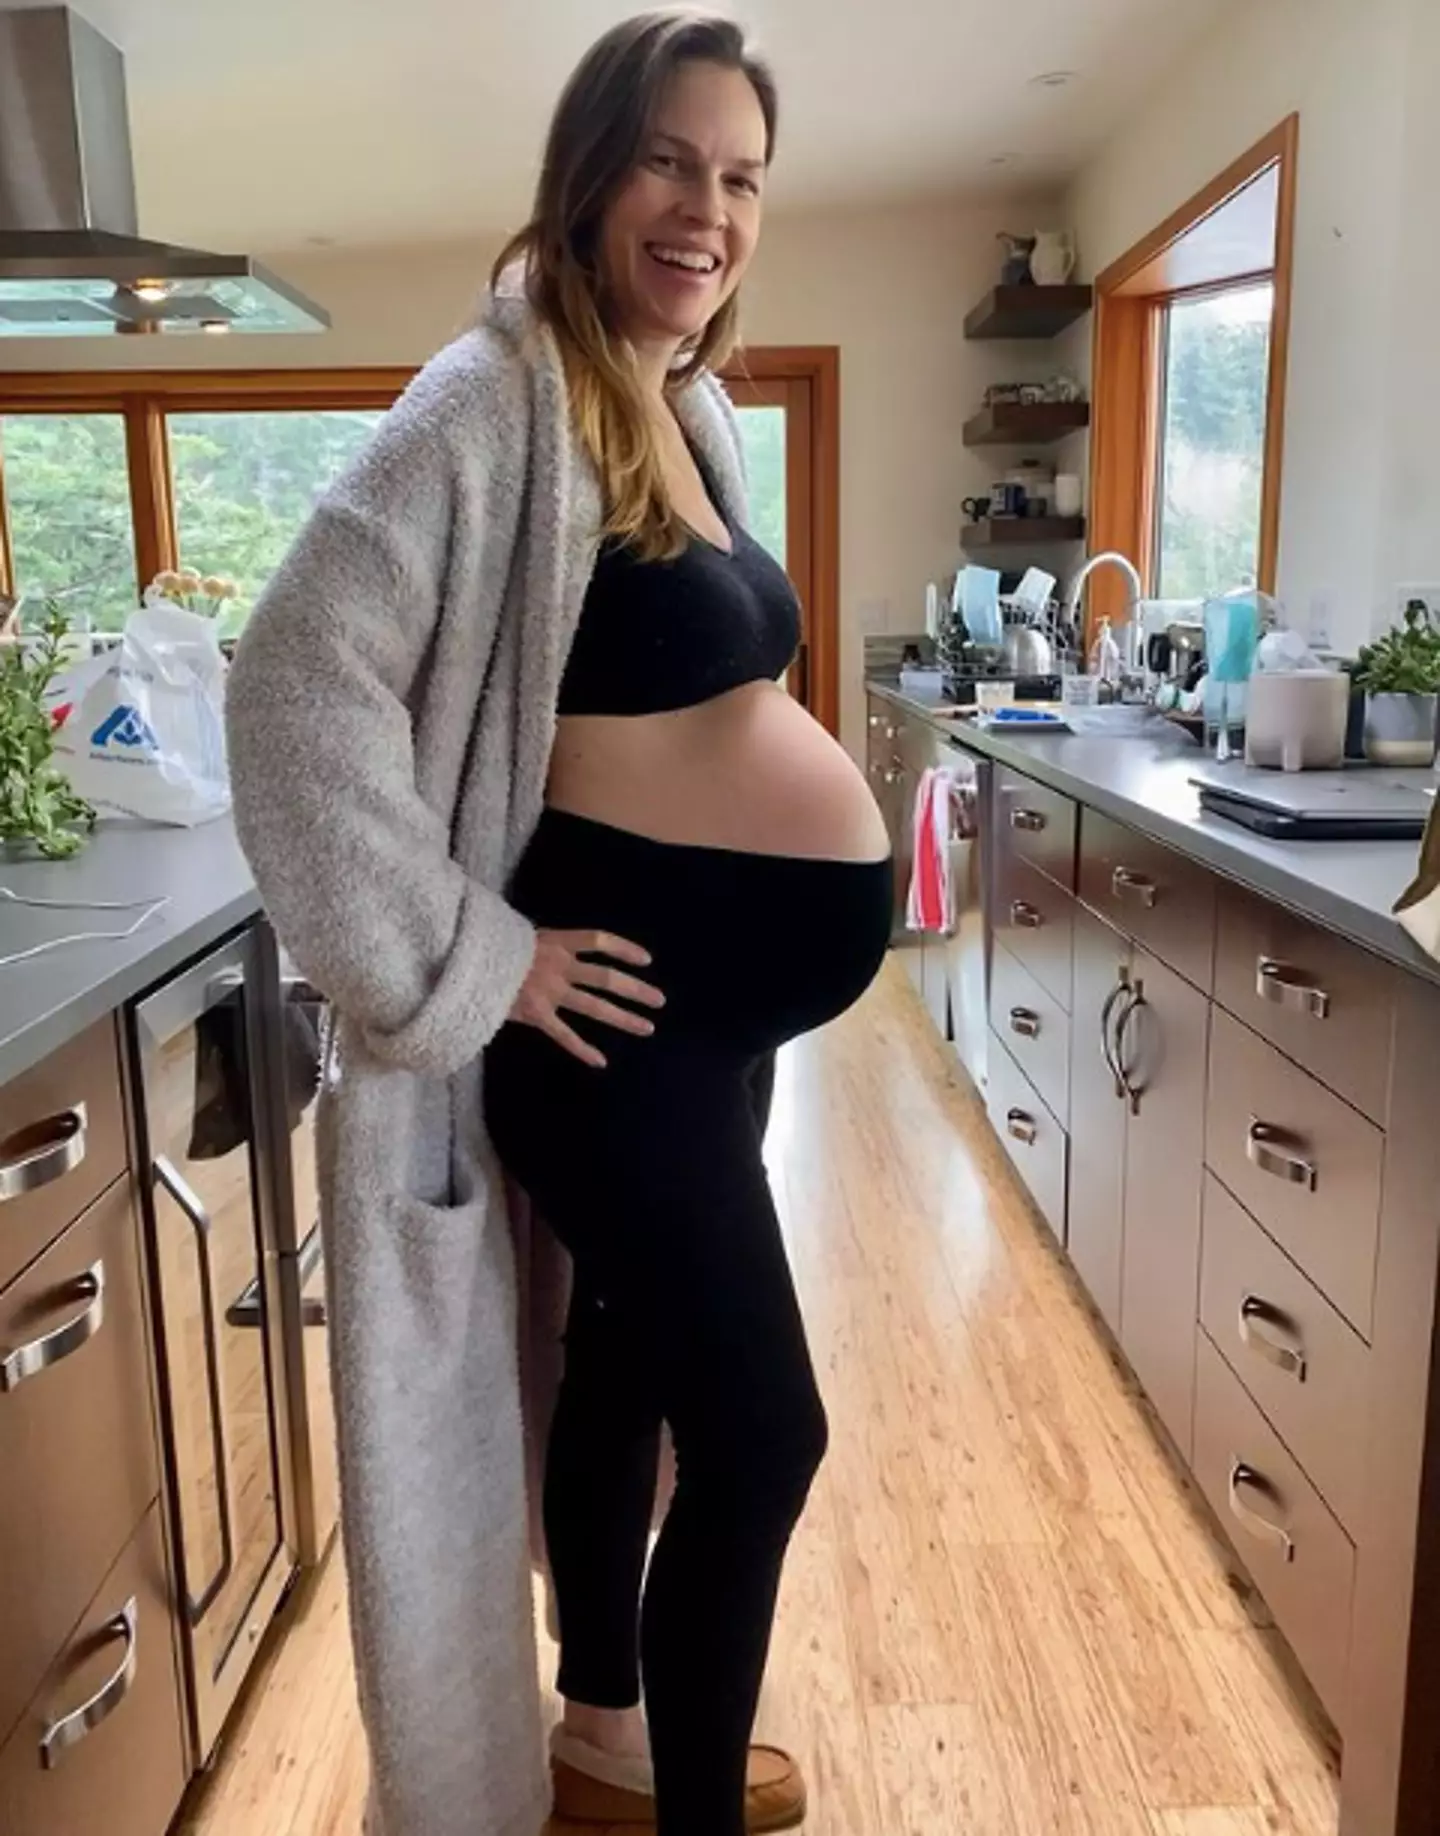 She explained that all her pregnancy symptoms were 'doubled'.